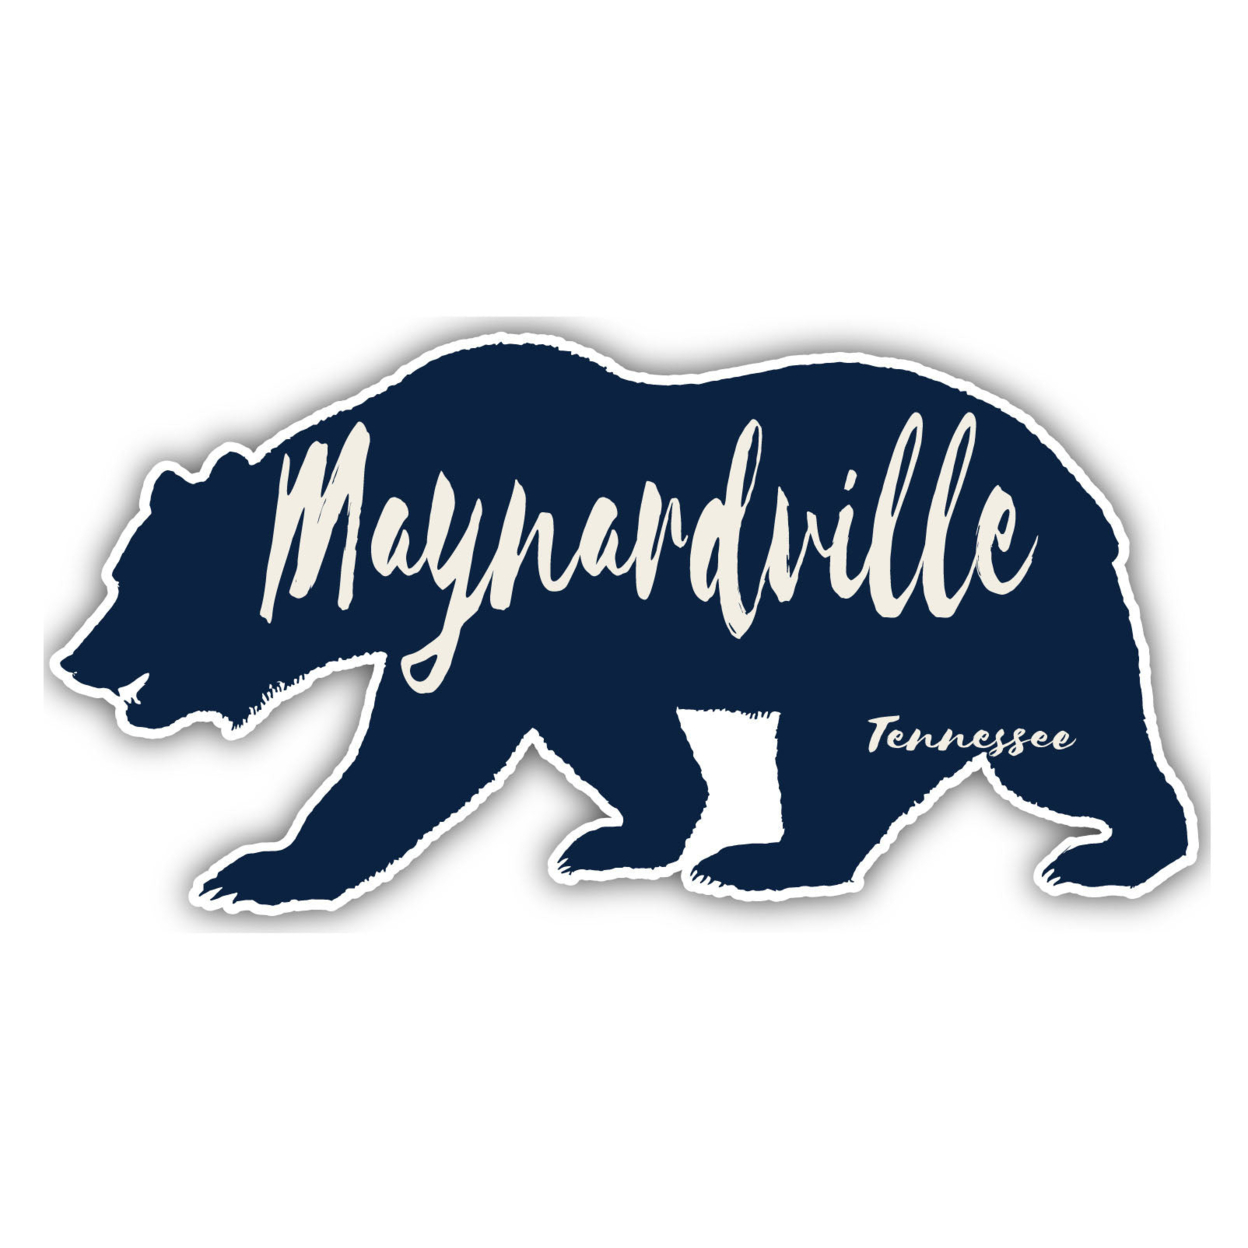 Maynardville Tennessee Souvenir Decorative Stickers (Choose Theme And Size) - 4-Inch, Great Outdoors